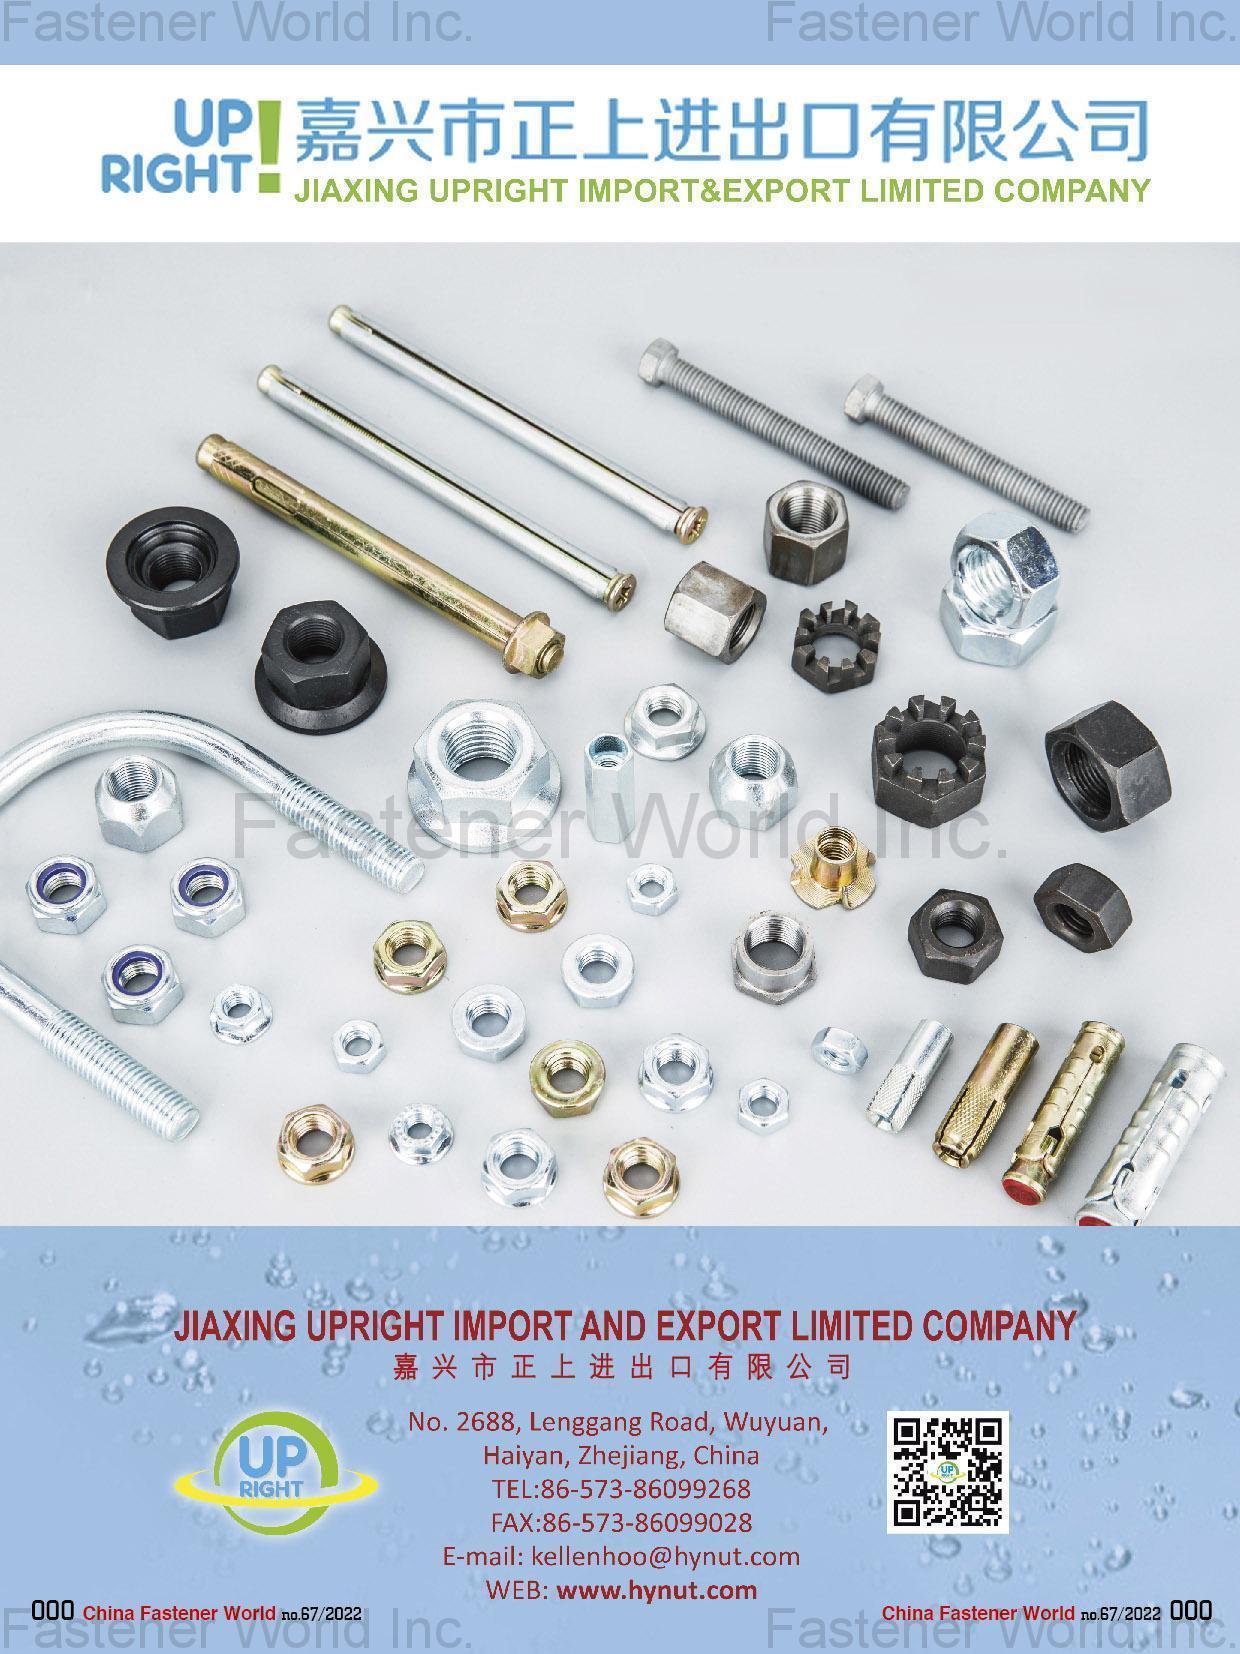 JIAXING UPRIGHT IMPORT AND EXPORT LIMITED COMPANY , Hexagon Nuts/Lug Nuts/Cap Nuts/Flange Nuts/Nylon Insert Nuts/Tee Or T Nuts/Blind Nuts / Rivet Nuts